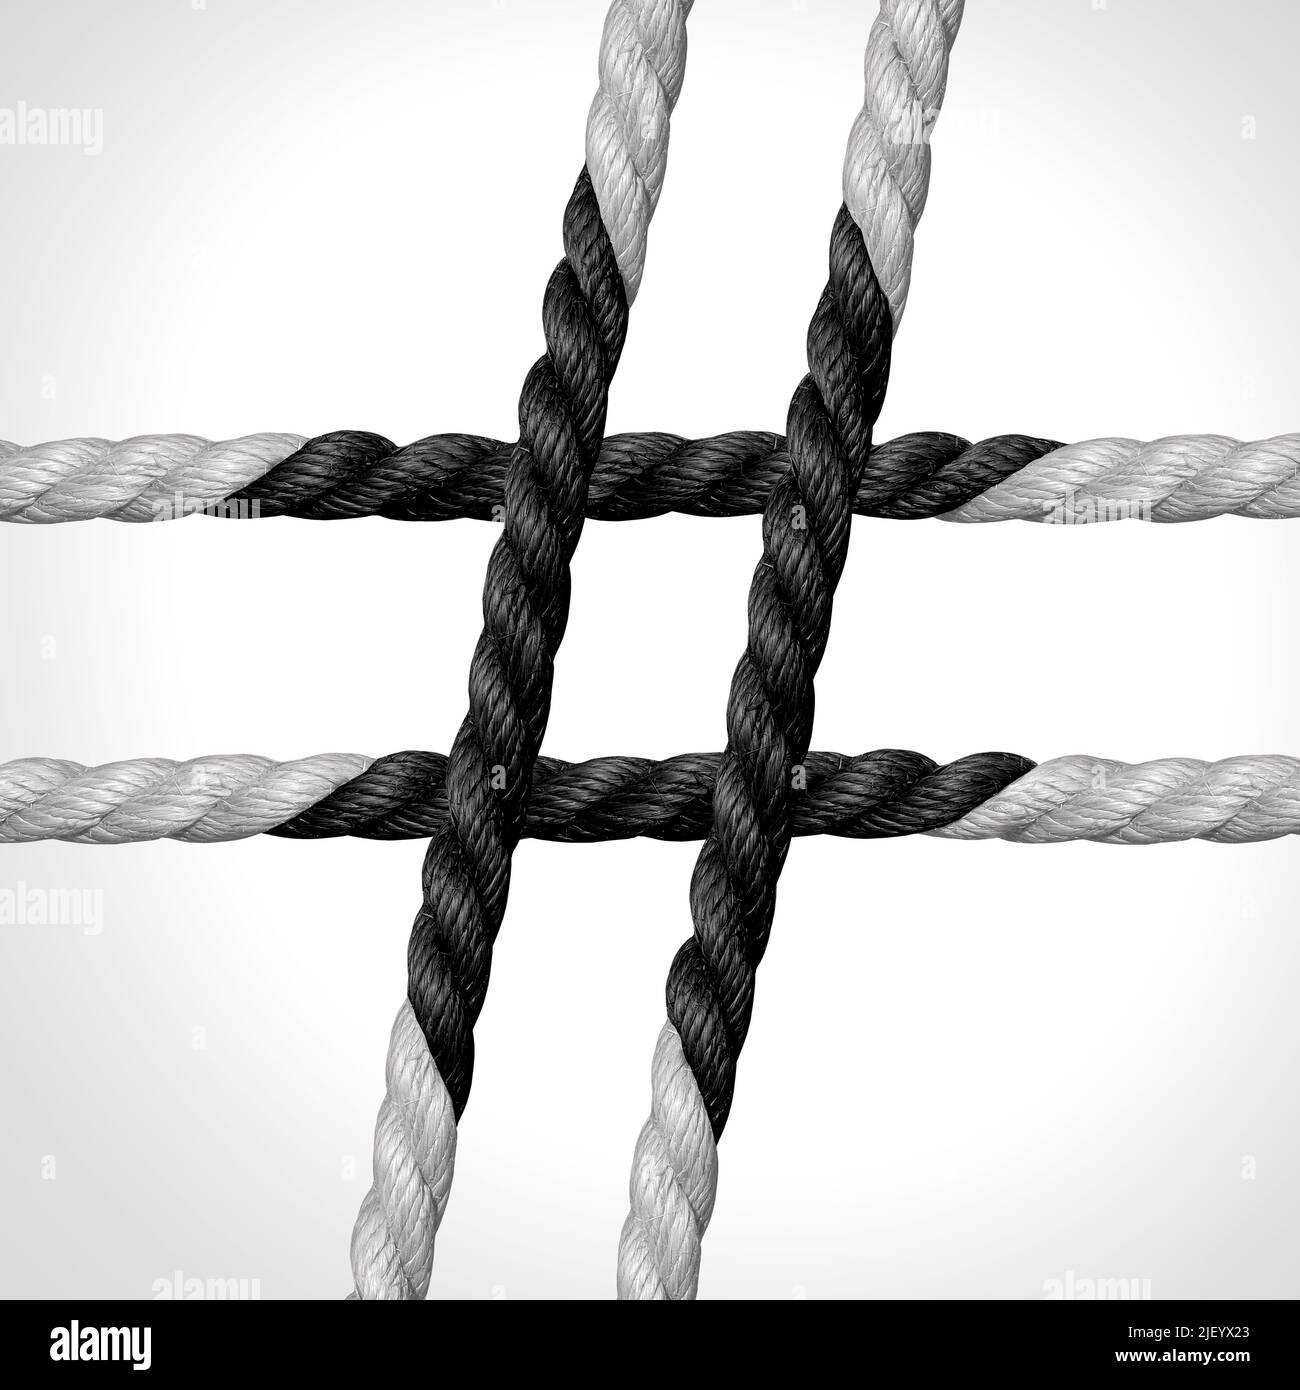 Hashtag Social Issues as a concept for microblogging networks or blogging network as a group of ropes connected together as a hyperlink symbol. Stock Photo